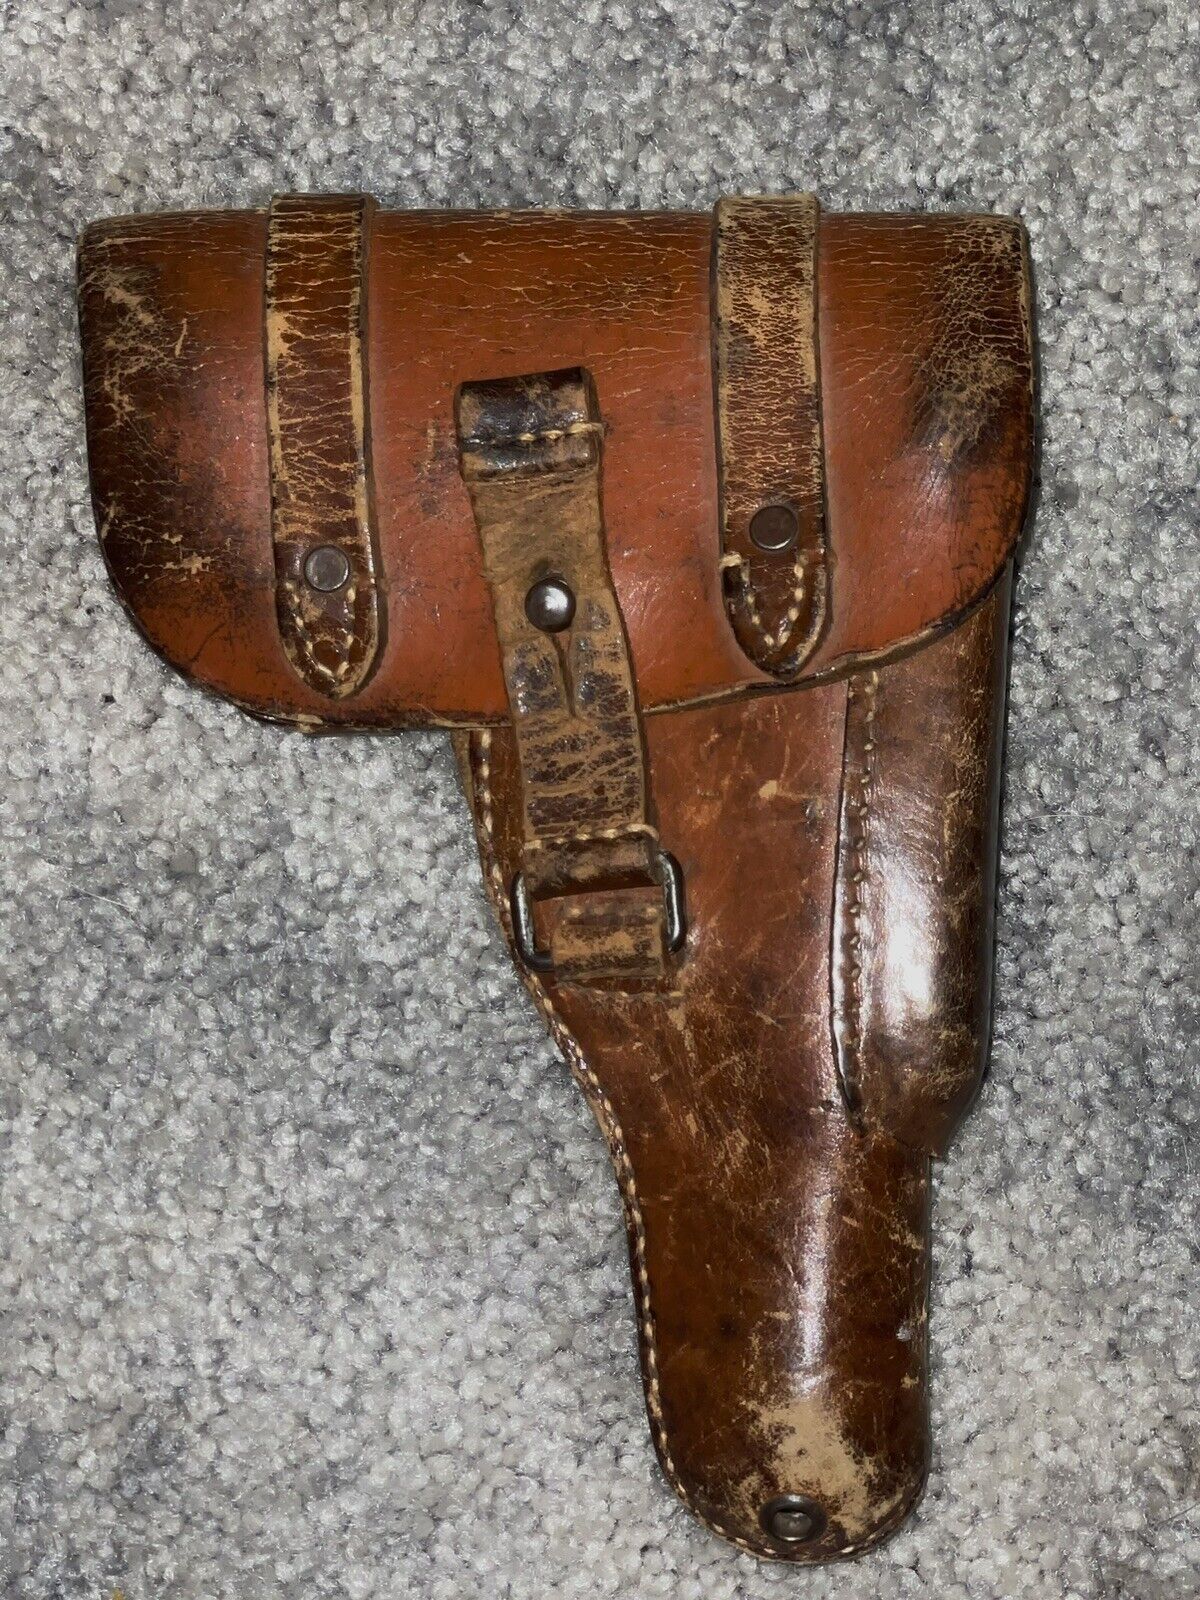 Authentic German Leather 1943 Luftwaffe Browning Fn model 1922 Dropping Holster